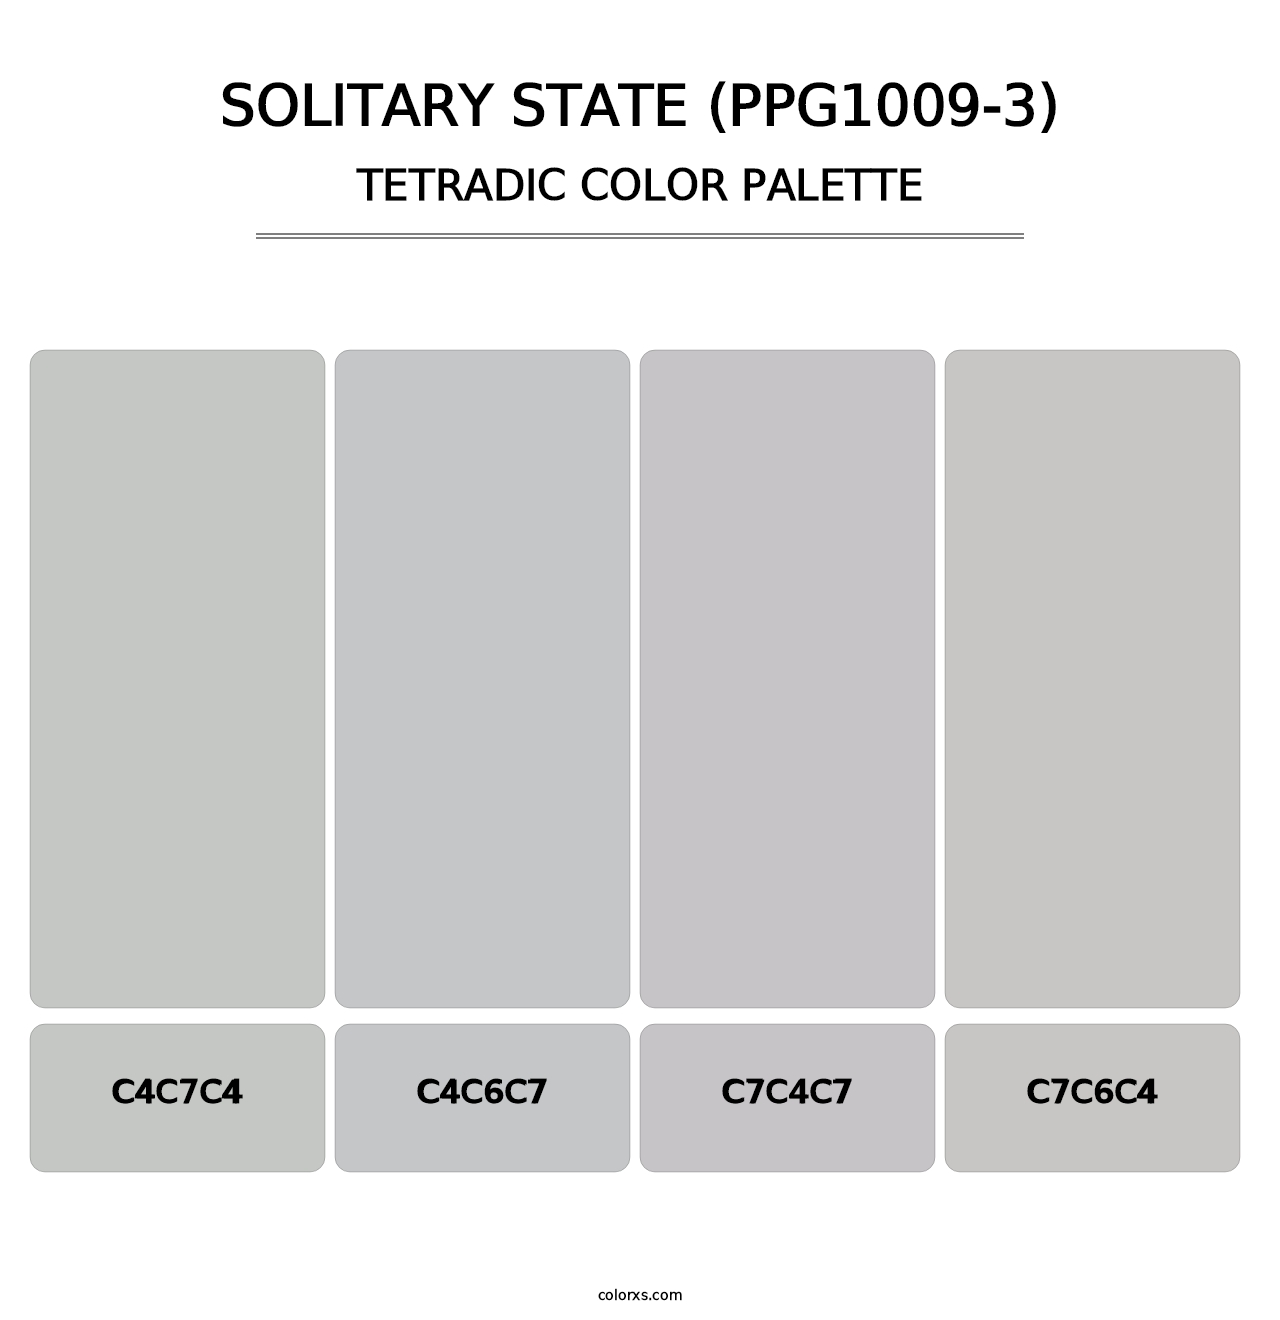 Solitary State (PPG1009-3) - Tetradic Color Palette